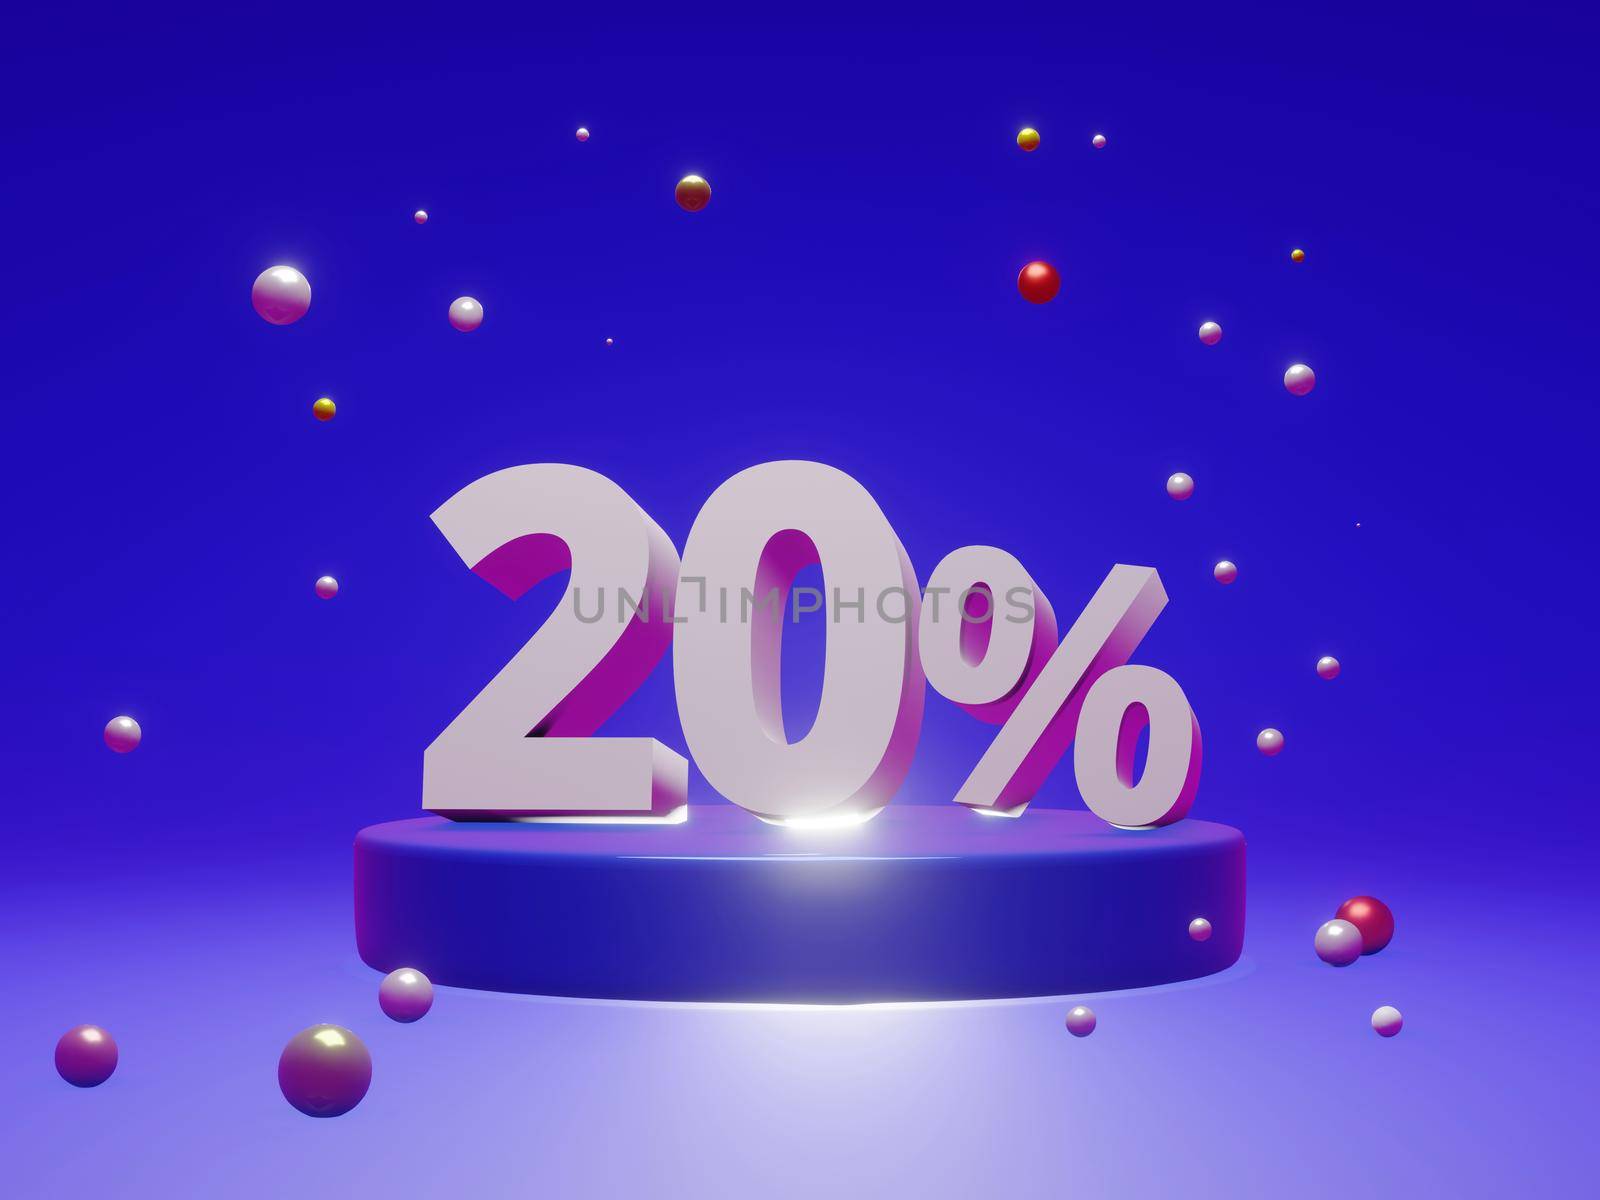 The podium shows up to 20% off discount concept banners, promotional sales, and super shopping offer banners. 3D rendering.